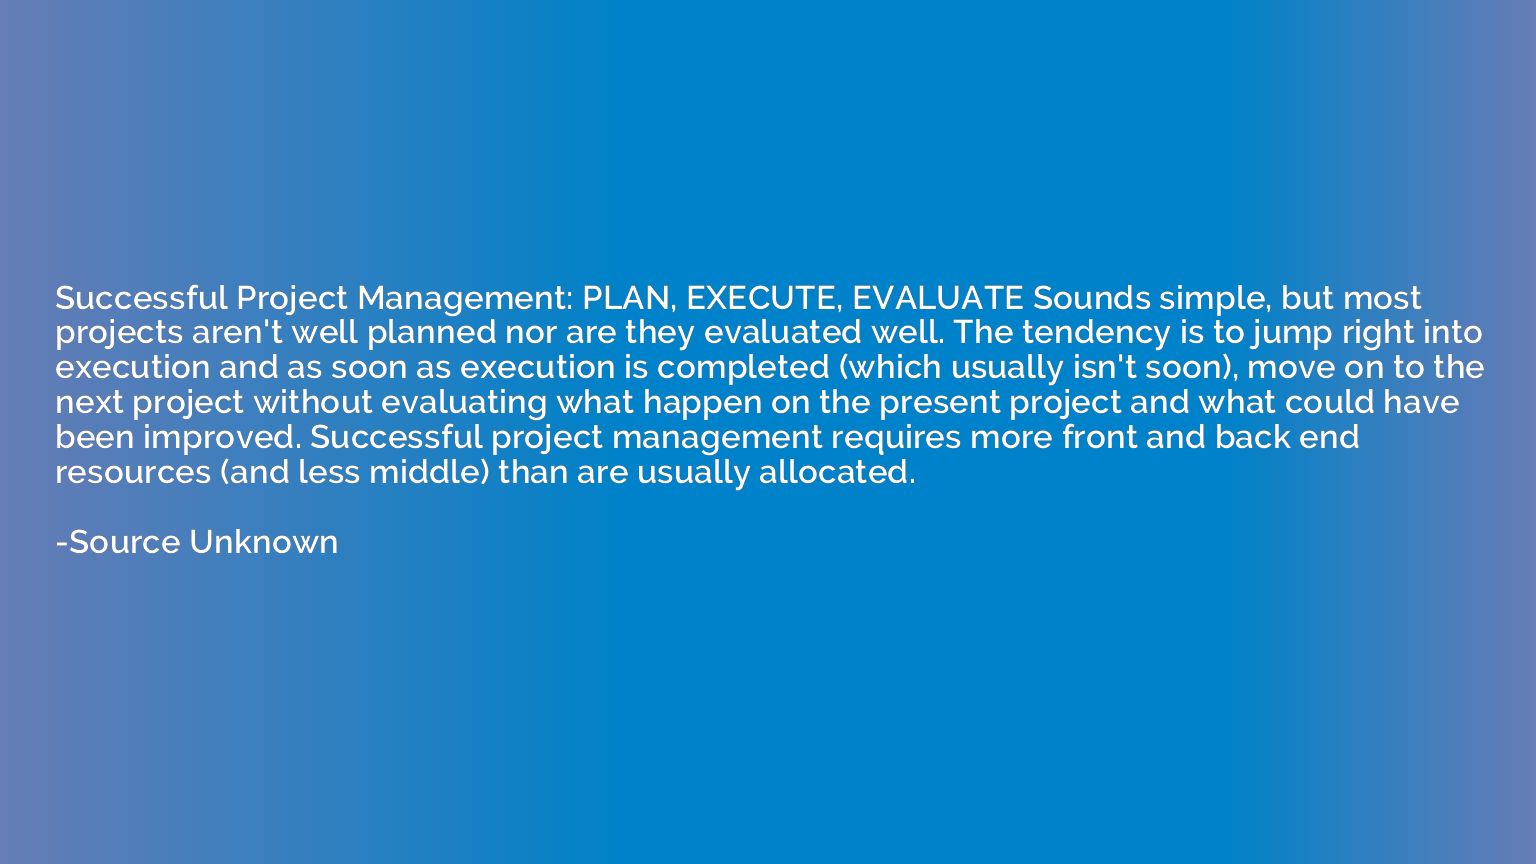 Successful Project Management: PLAN, EXECUTE, EVALUATE Sound